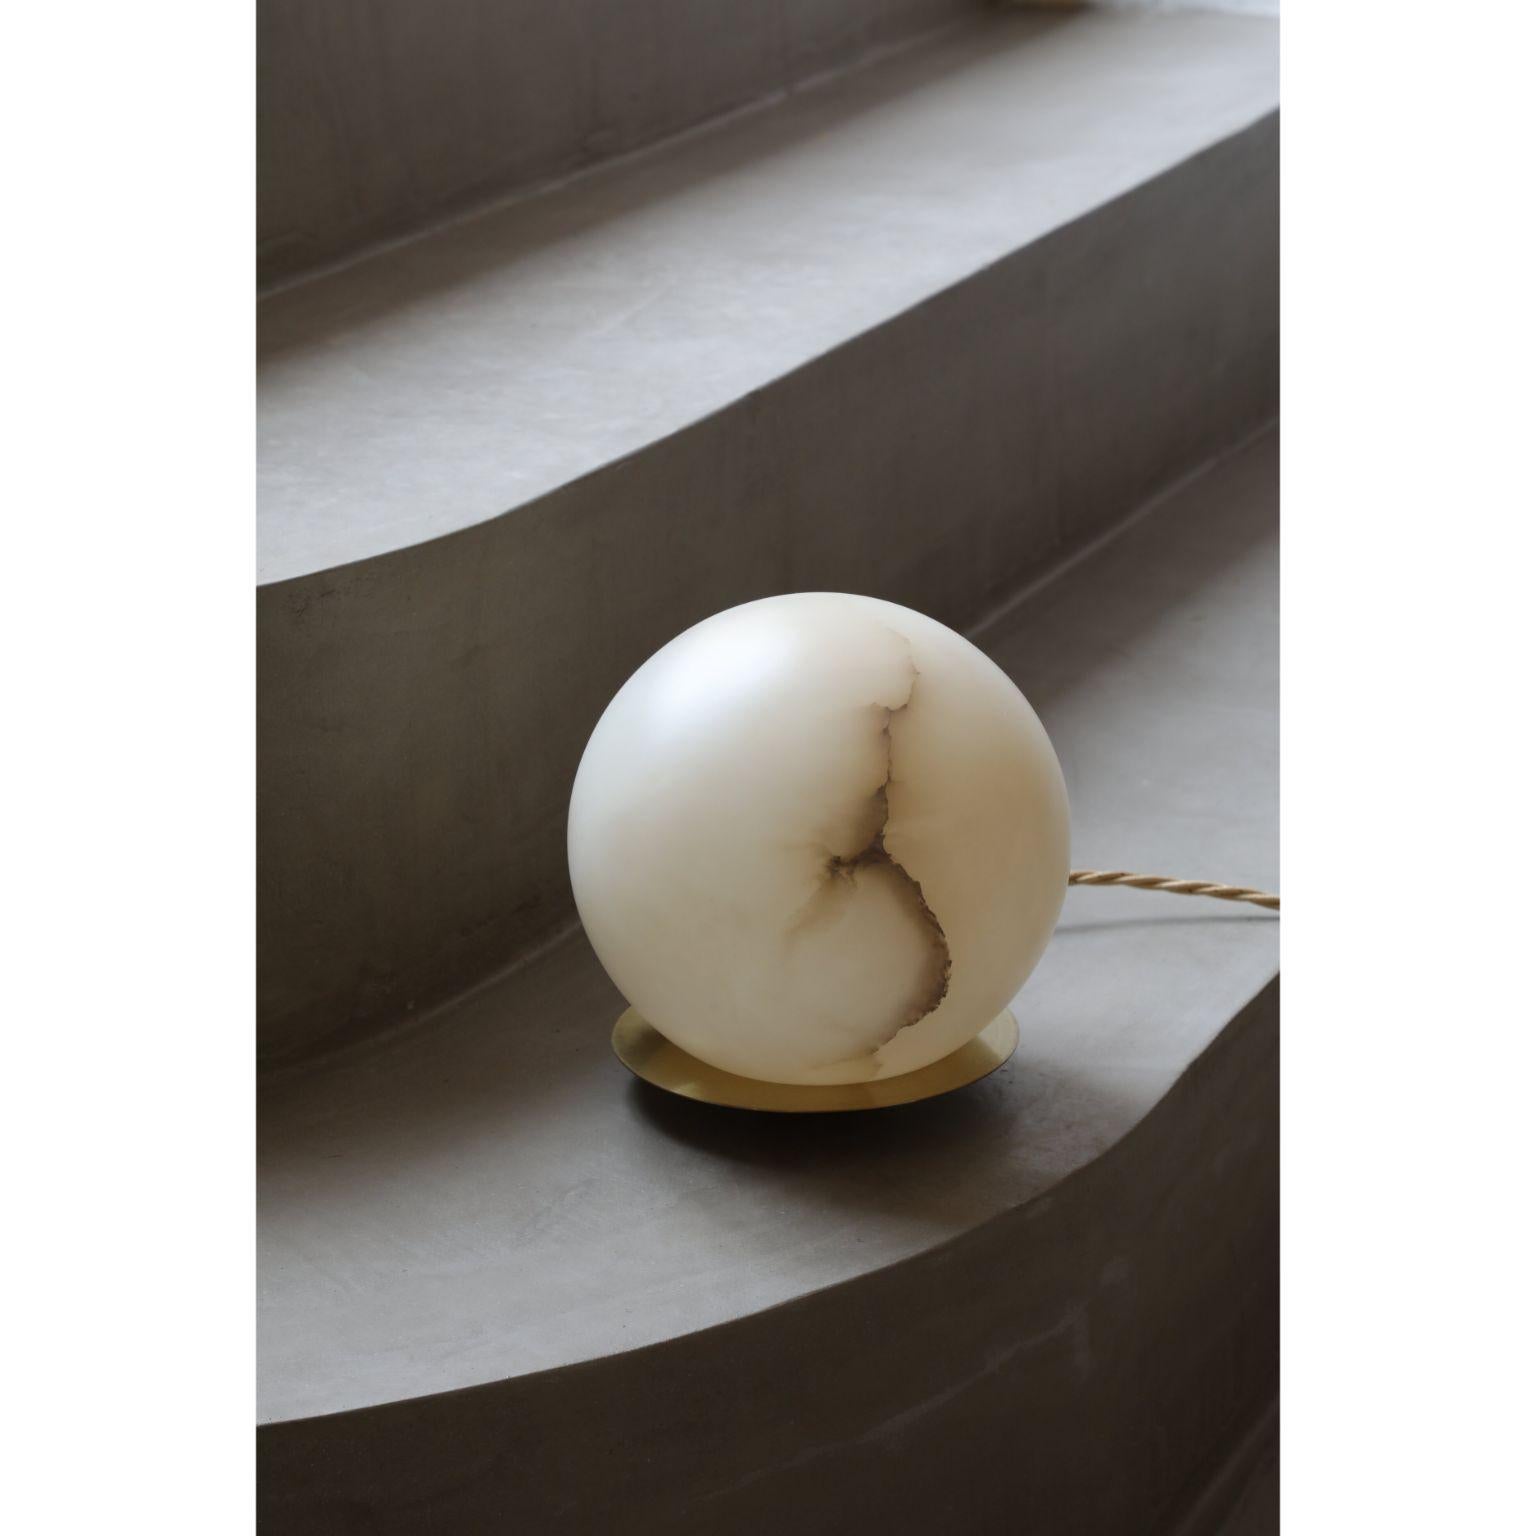 Planette Alabaster table lamp by Contain
Dimensions: D16.5 x H16.5 cm 
Materials: alabaster, brass
Also available in different finishes.

All our lamps can be wired according to each country. If sold to the USA it will be wired for the USA for